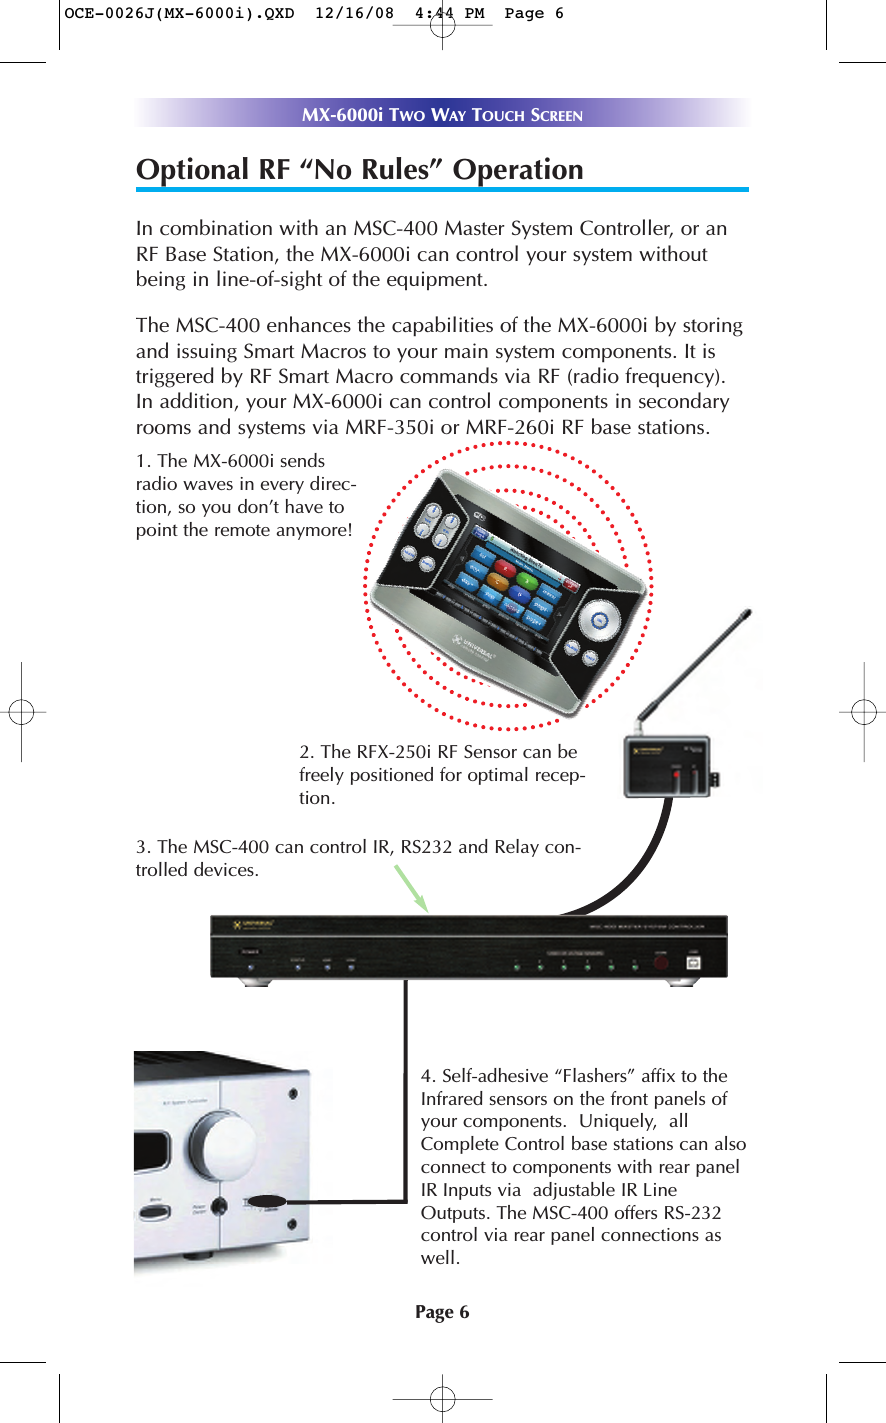 Page 6MX-6000i TWO WAY TOUCH SCREENOptional RF “No Rules” OperationIn combination with an MSC-400 Master System Controller, or anRF Base Station, the MX-6000i can control your system withoutbeing in line-of-sight of the equipment. The MSC-400 enhances the capabilities of the MX-6000i by storingand issuing Smart Macros to your main system components. It istriggered by RF Smart Macro commands via RF (radio frequency).In addition, your MX-6000i can control components in secondaryrooms and systems via MRF-350i or MRF-260i RF base stations.4. Self-adhesive “Flashers” affix to theInfrared sensors on the front panels ofyour components.  Uniquely,  allComplete Control base stations can alsoconnect to components with rear panelIR Inputs via  adjustable IR LineOutputs. The MSC-400 offers RS-232control via rear panel connections aswell.3. The MSC-400 can control IR, RS232 and Relay con-trolled devices. 1. The MX-6000i sendsradio waves in every direc-tion, so you don’t have topoint the remote anymore! 2. The RFX-250i RF Sensor can befreely positioned for optimal recep-tion.OCE-0026J(MX-6000i).QXD  12/16/08  4:44 PM  Page 6